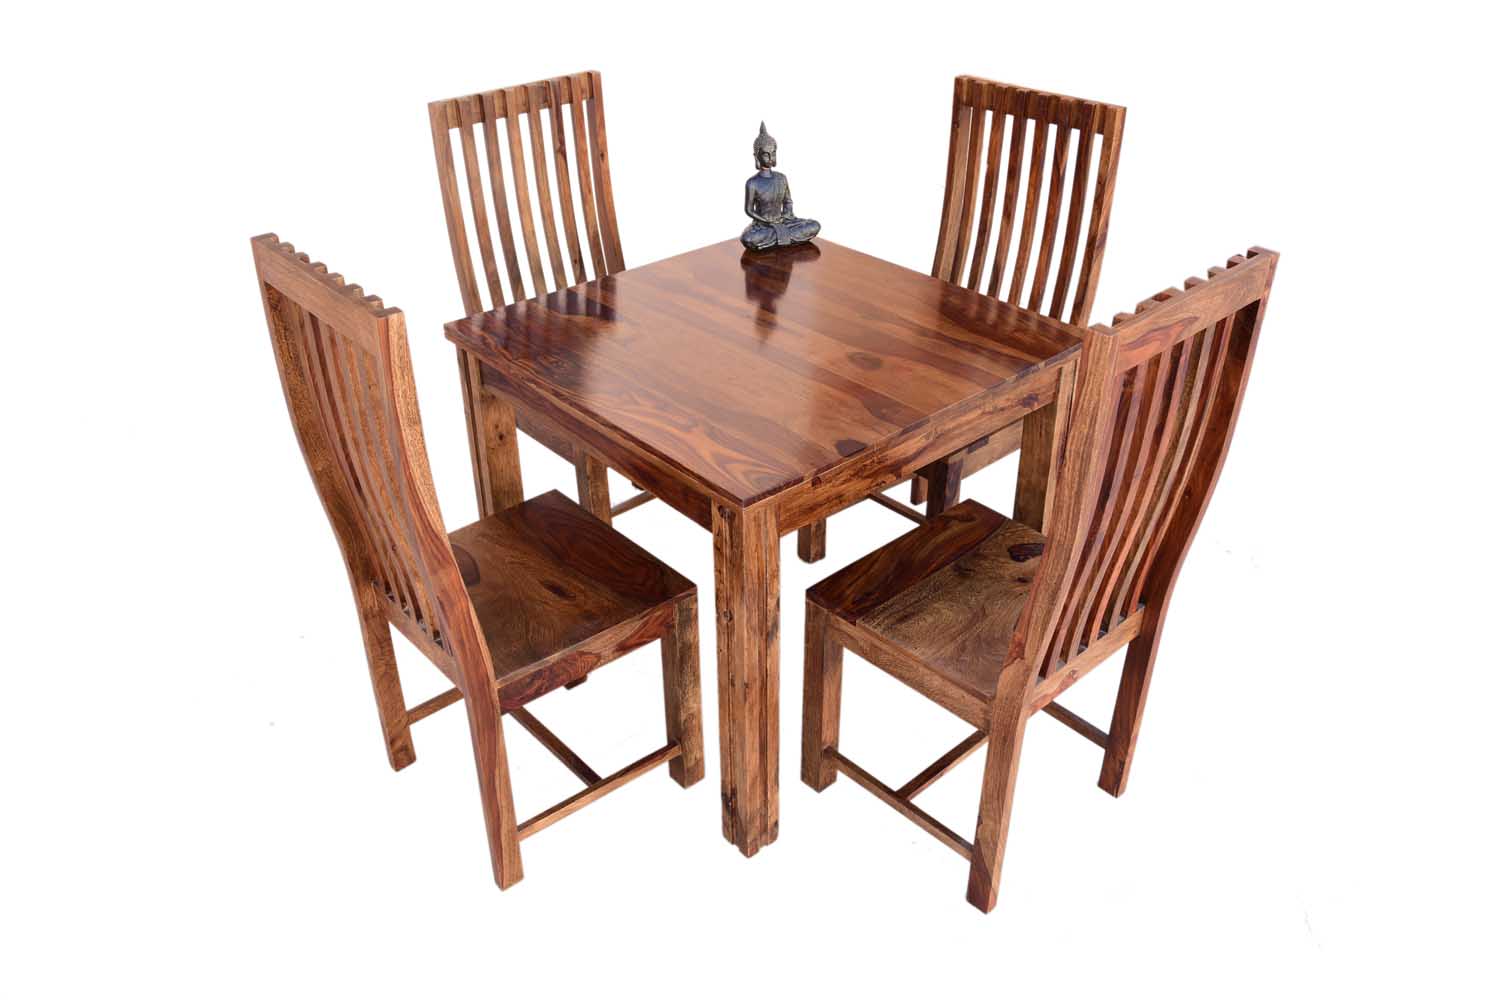 4 Seat Dining Room Table Set